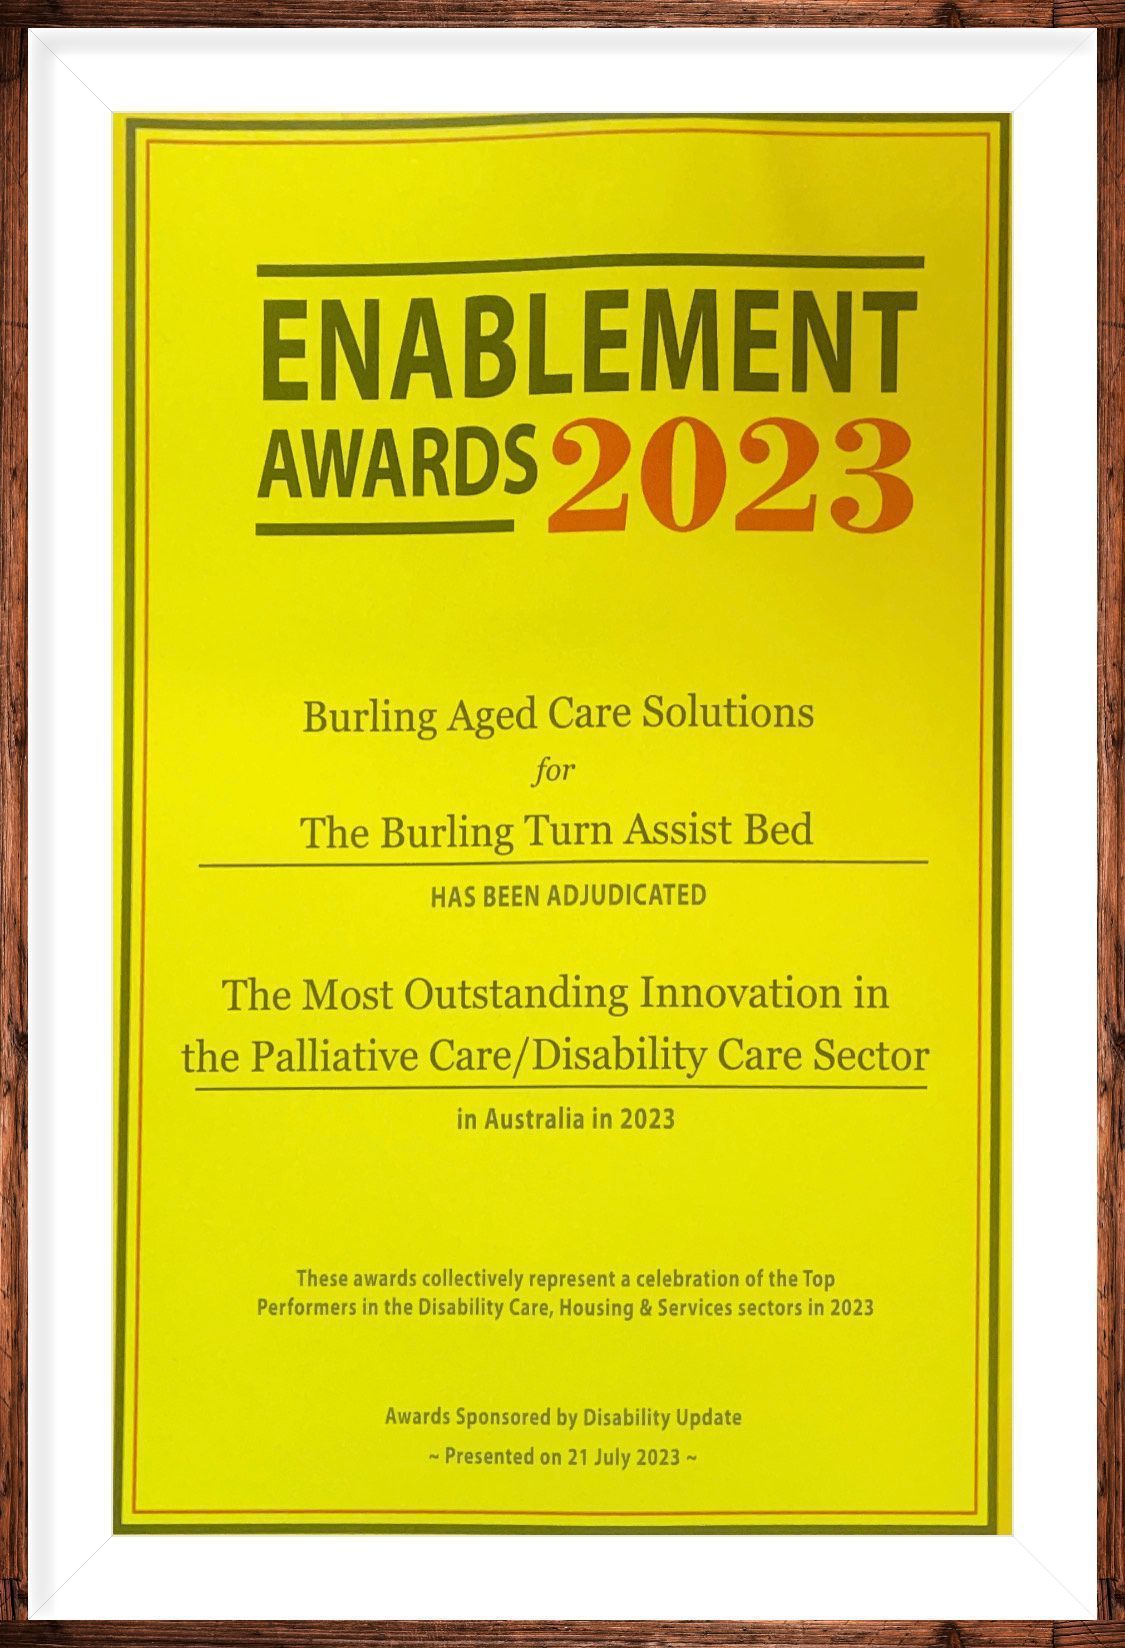 Burling Aged Care Solutions - The Burling Turn Assist Bed